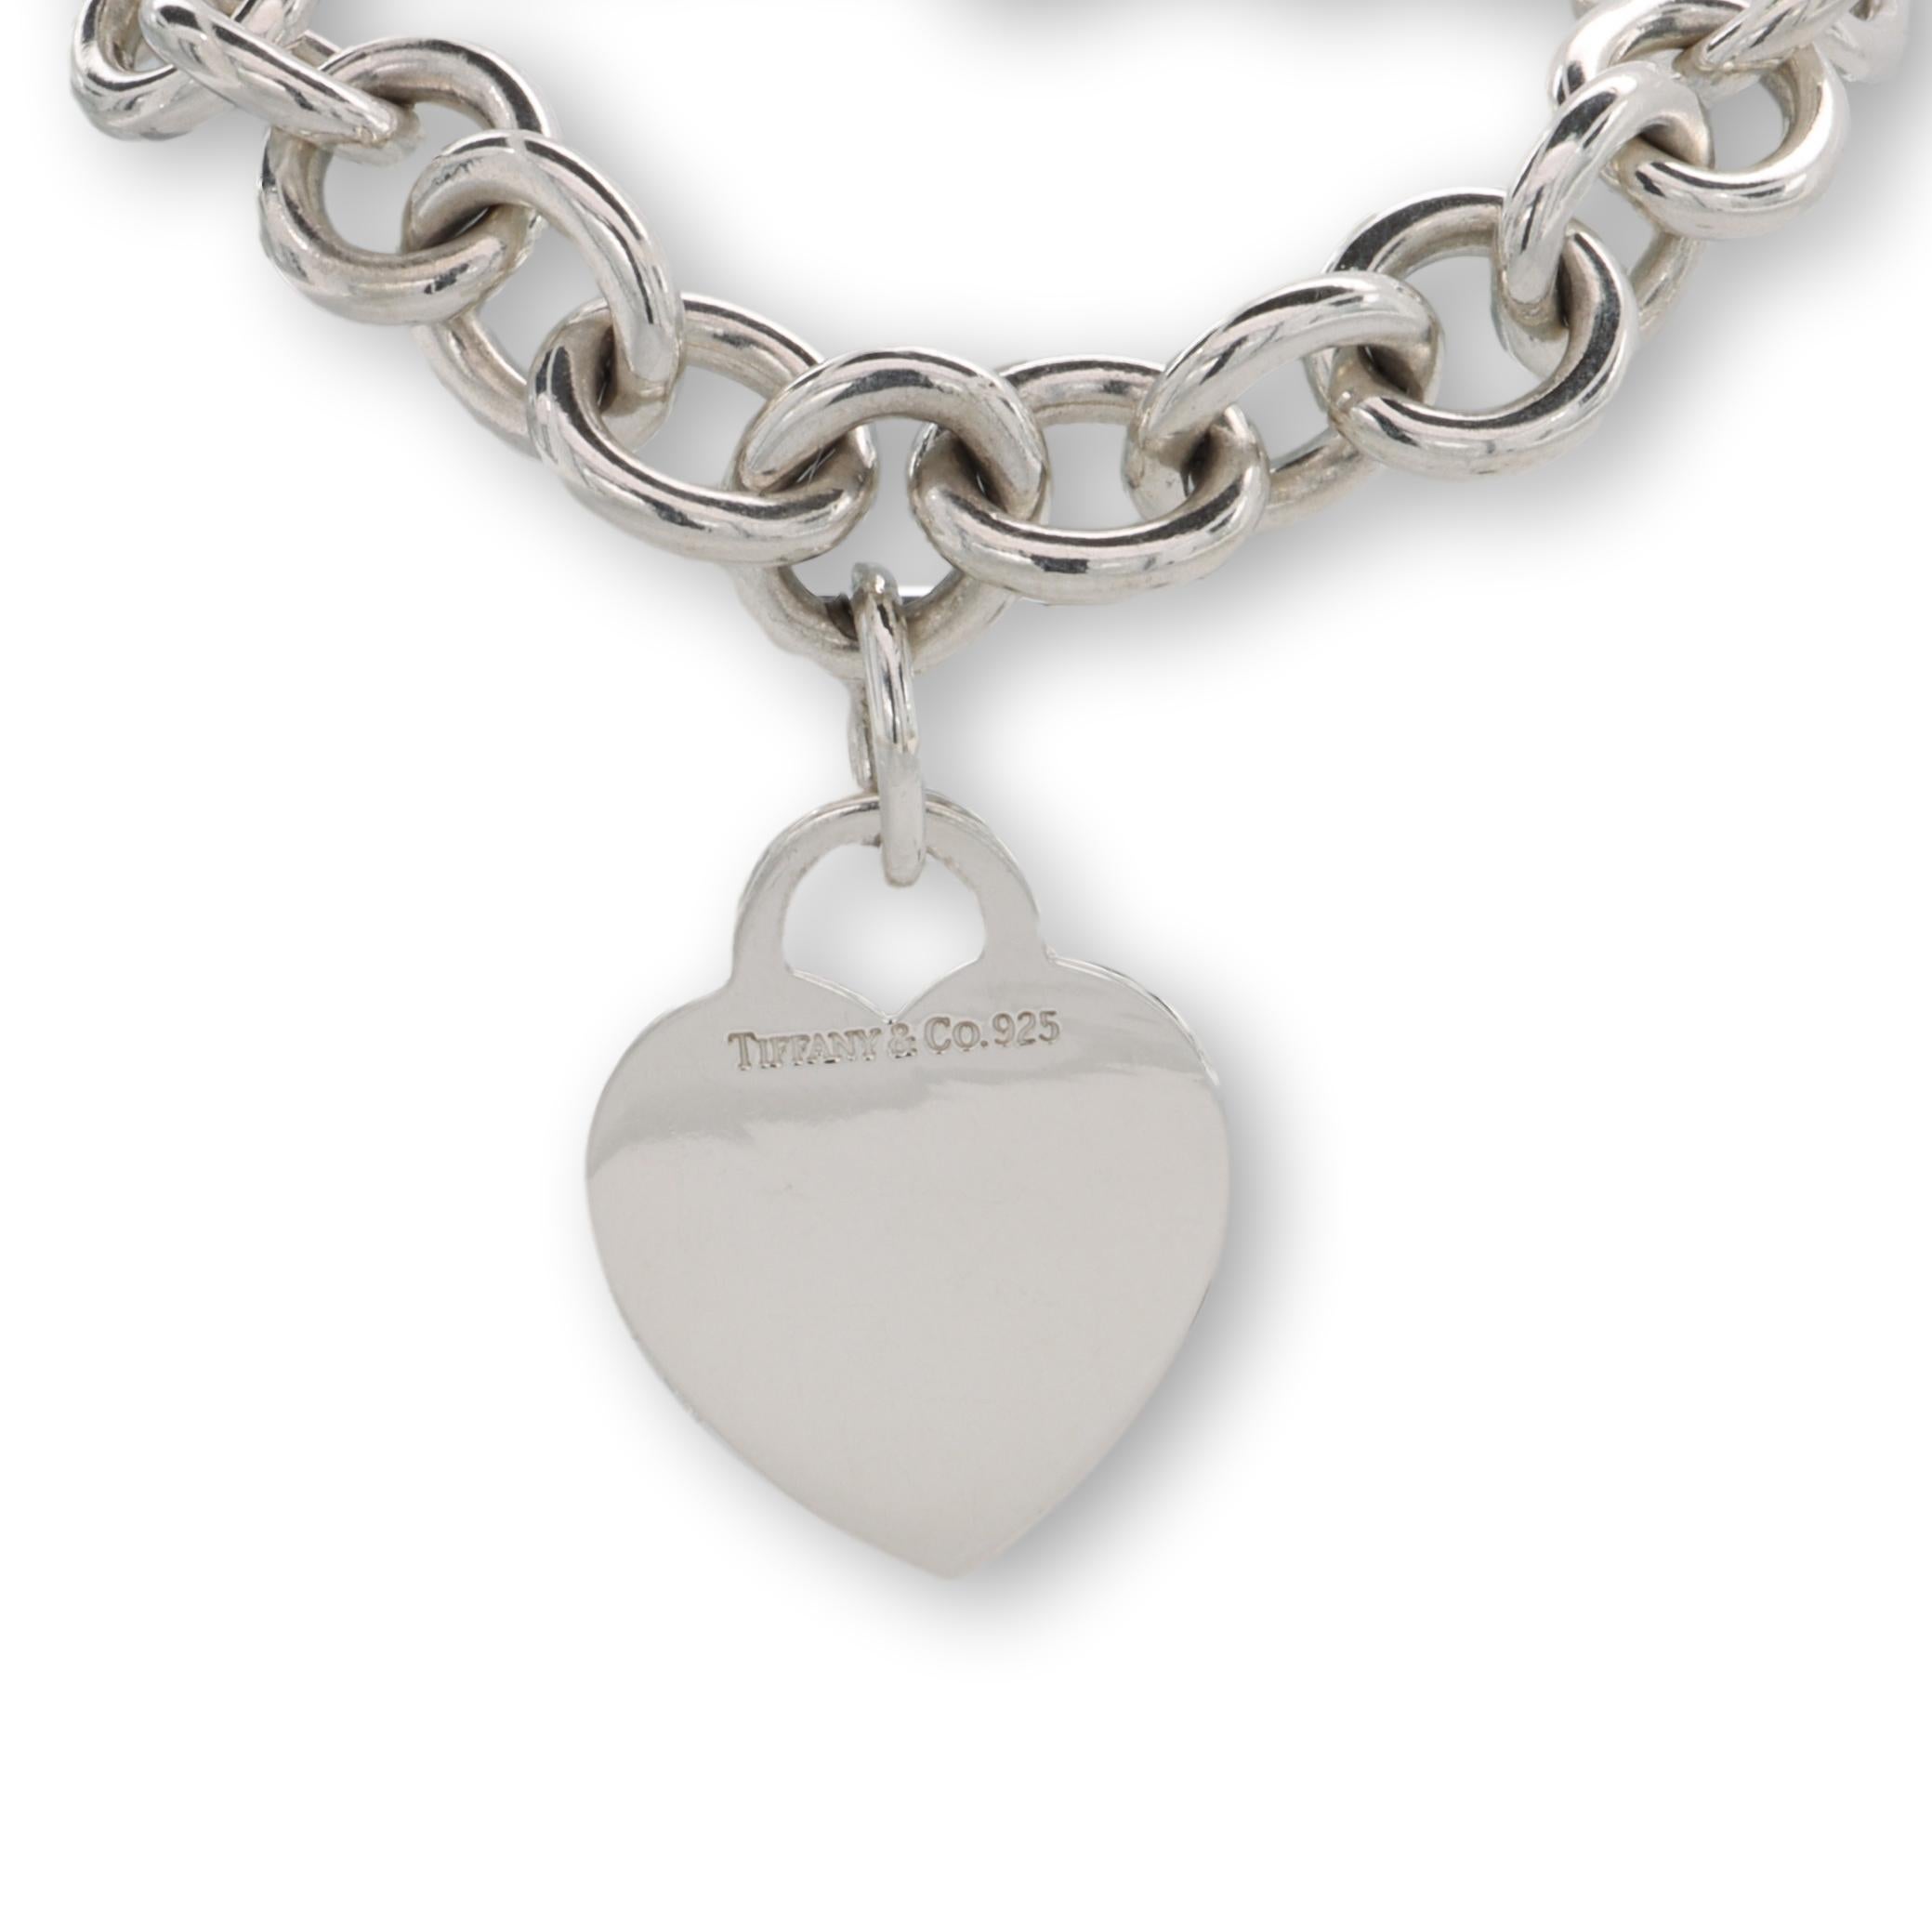 Tiffany & Co. large link necklace from the Return to Tiffany collection finely crafted in fine sterling silver featuring a large heart charm pendant hanging off a 16